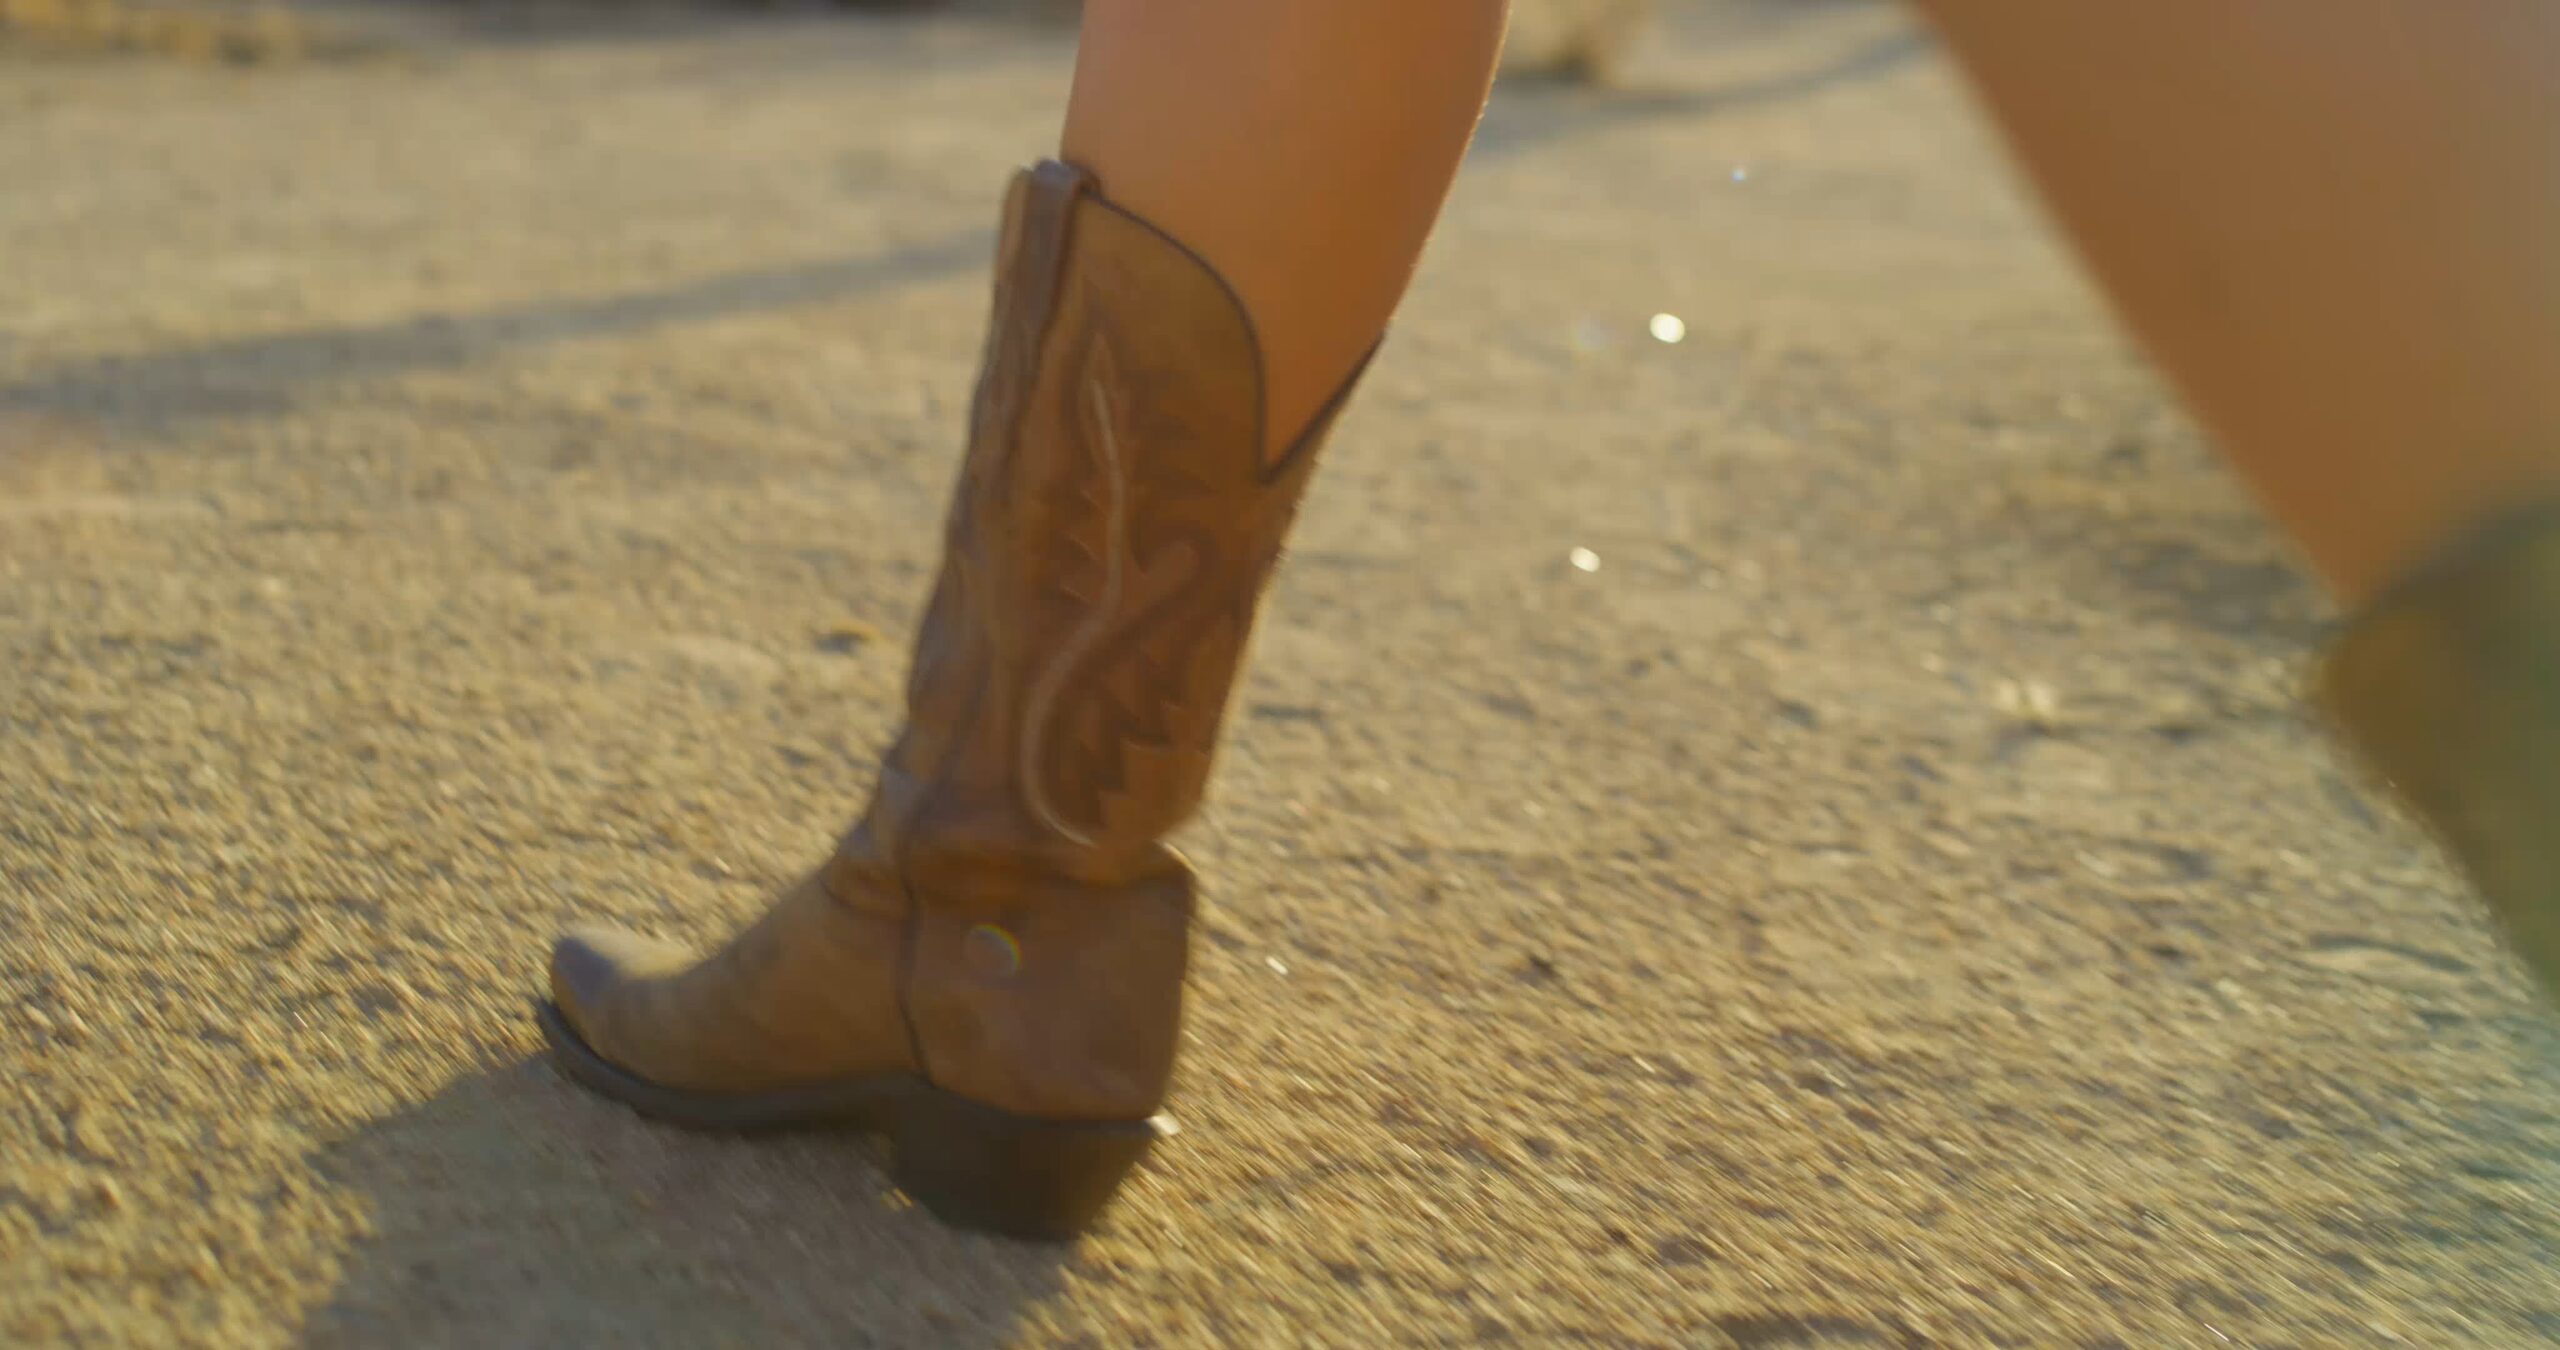 A person wearing a pair of brown cowboy boots on a sunlit, dusty ground, reminiscent of the atmosphere around new homes in Mansfield TX.